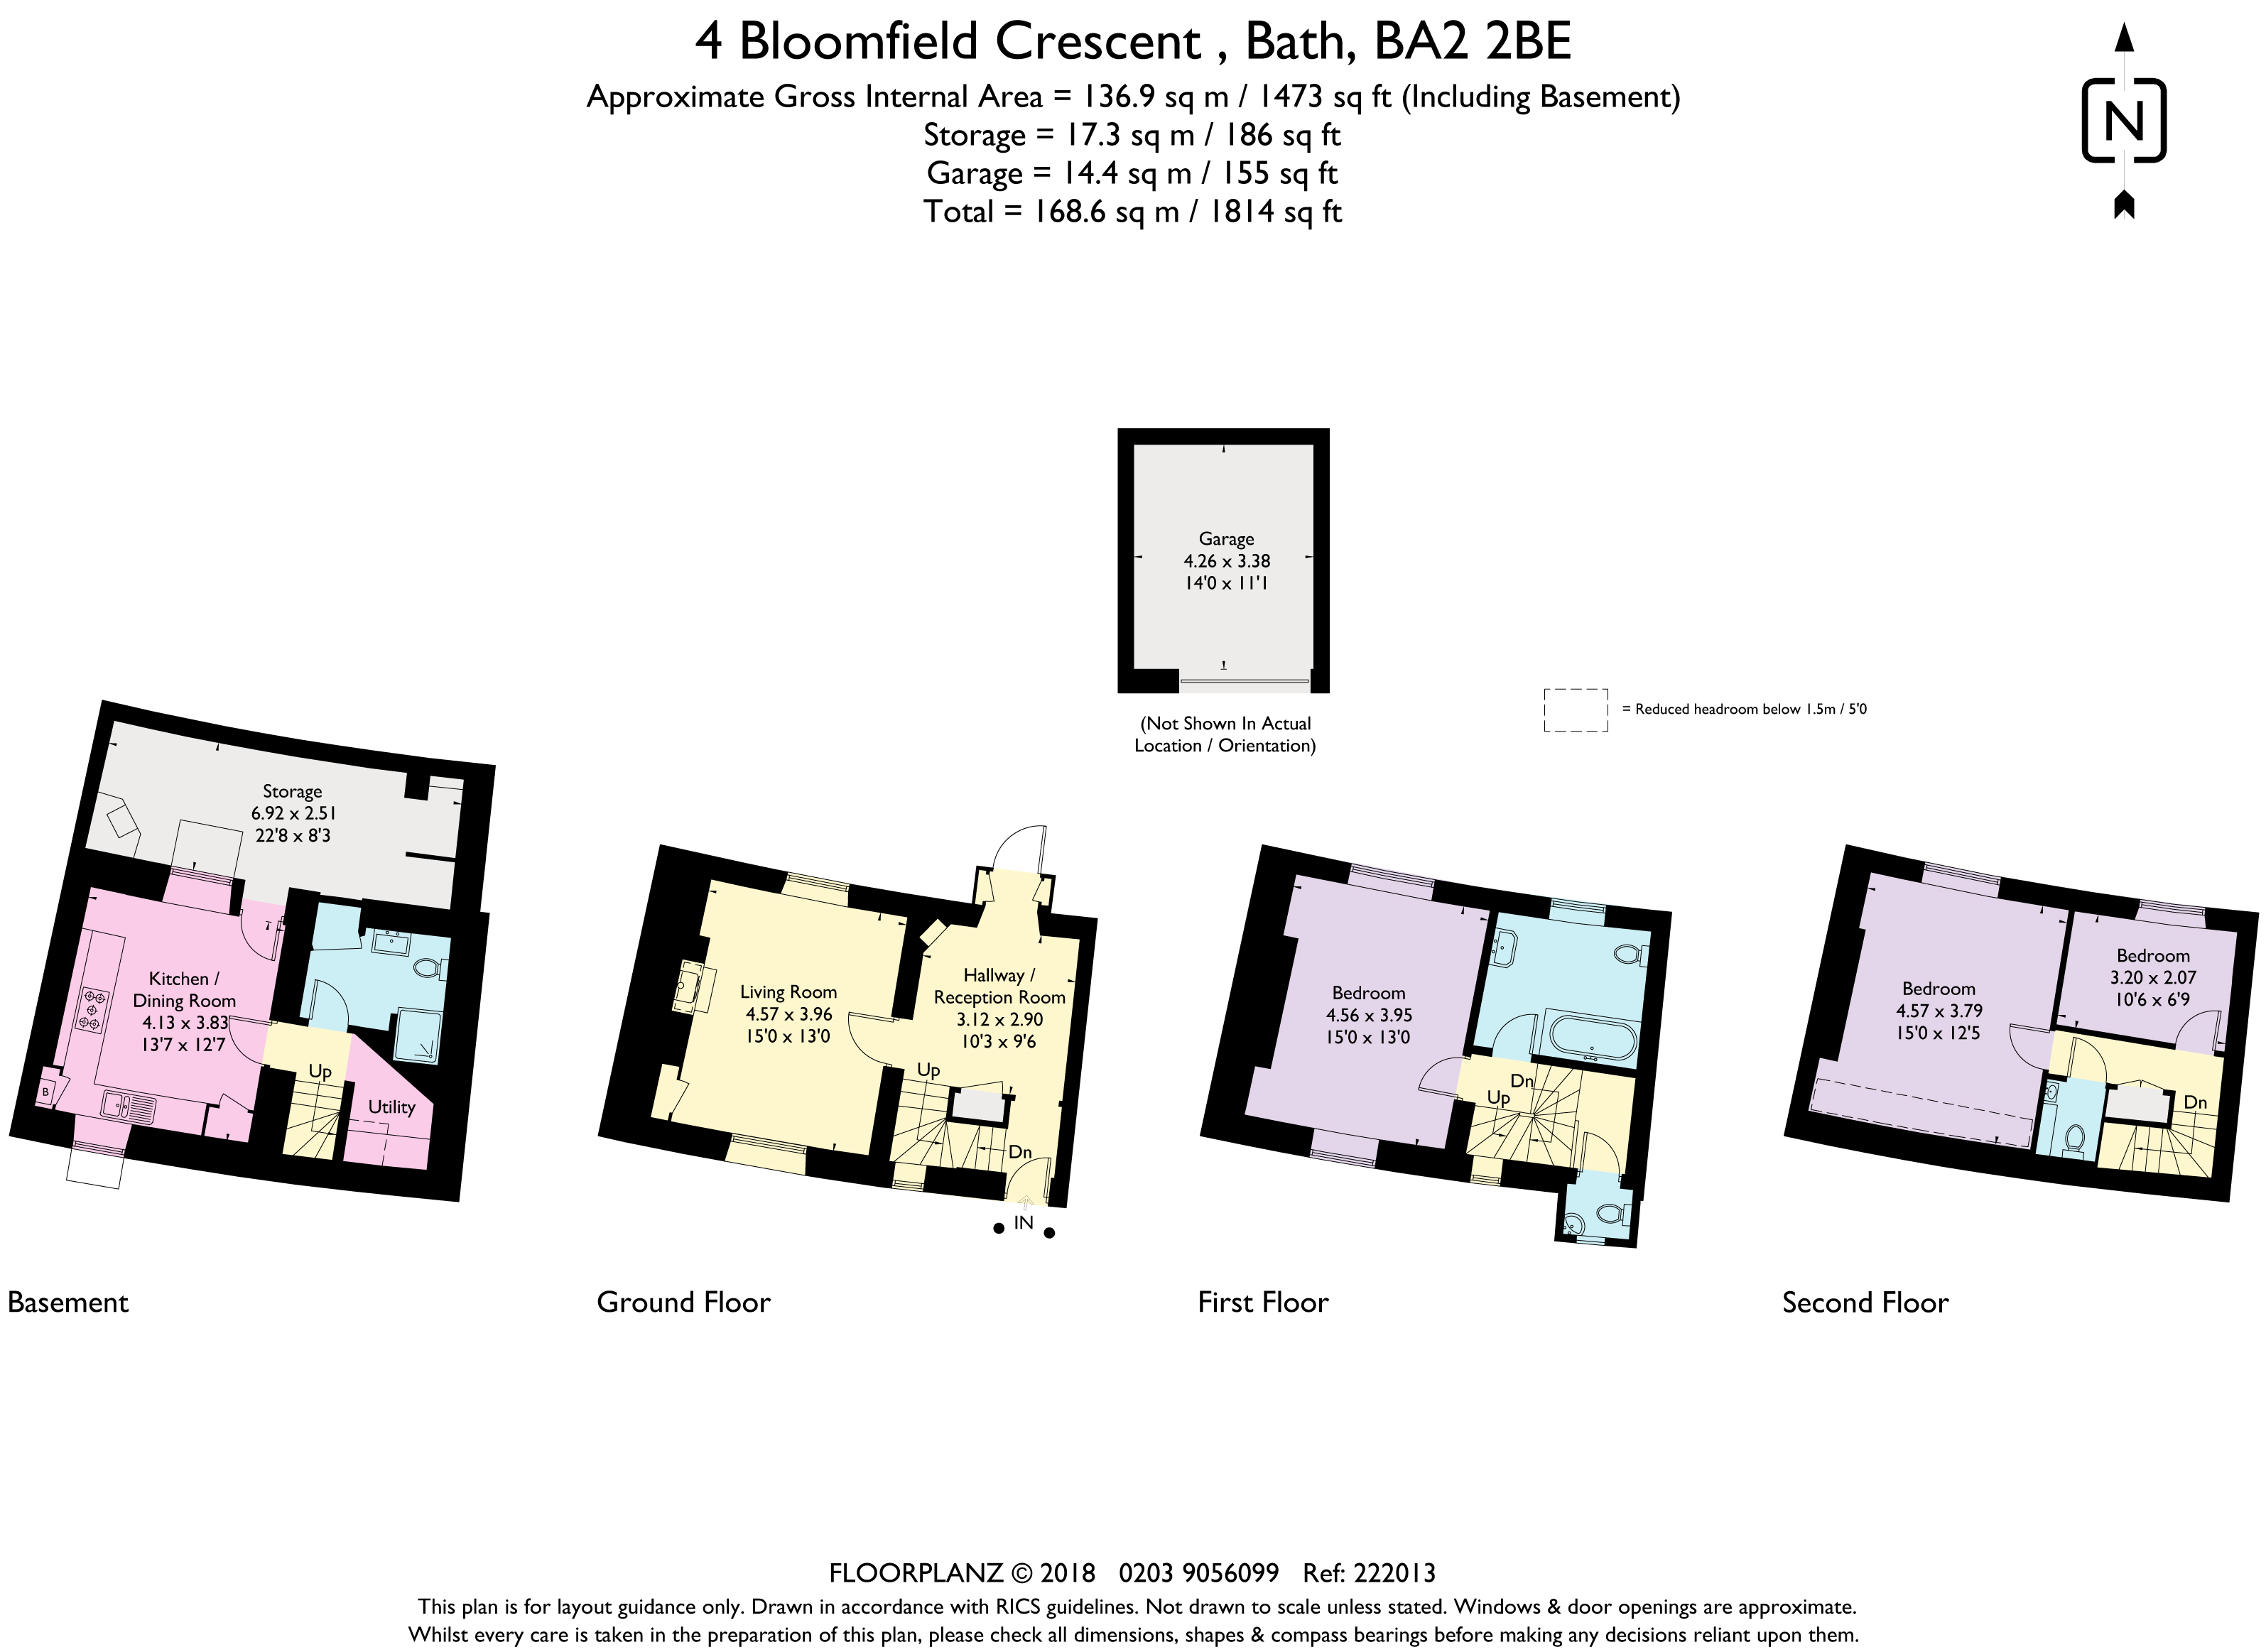 3 Bedrooms Terraced house to rent in Bloomfield Crescent, Bath BA2